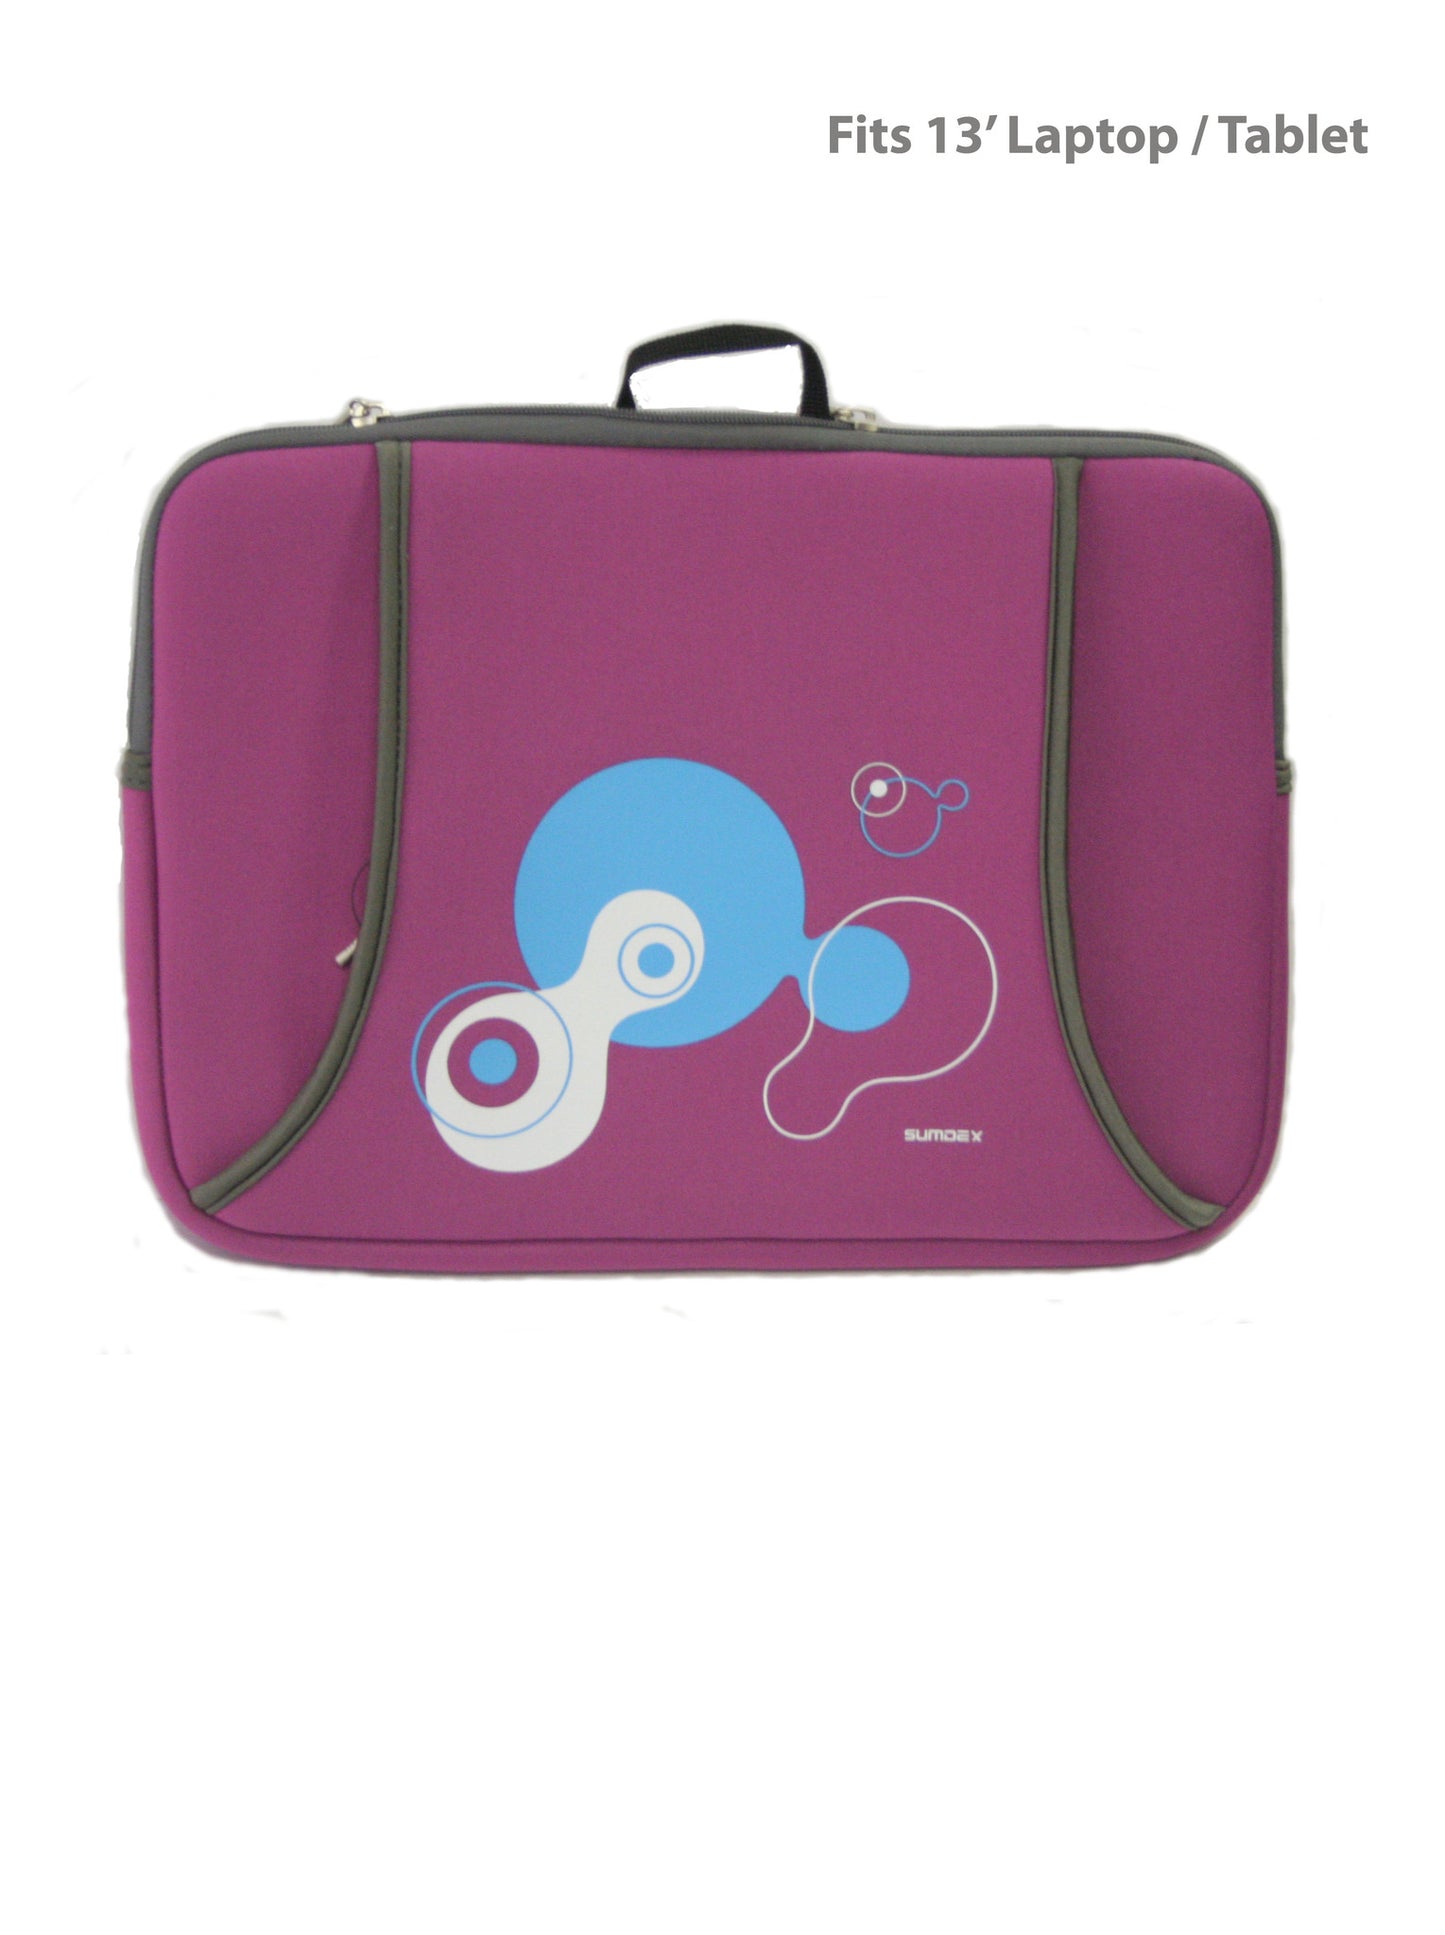 Printed Protective Laptop/ Tablet Sleeve-  Fits13'